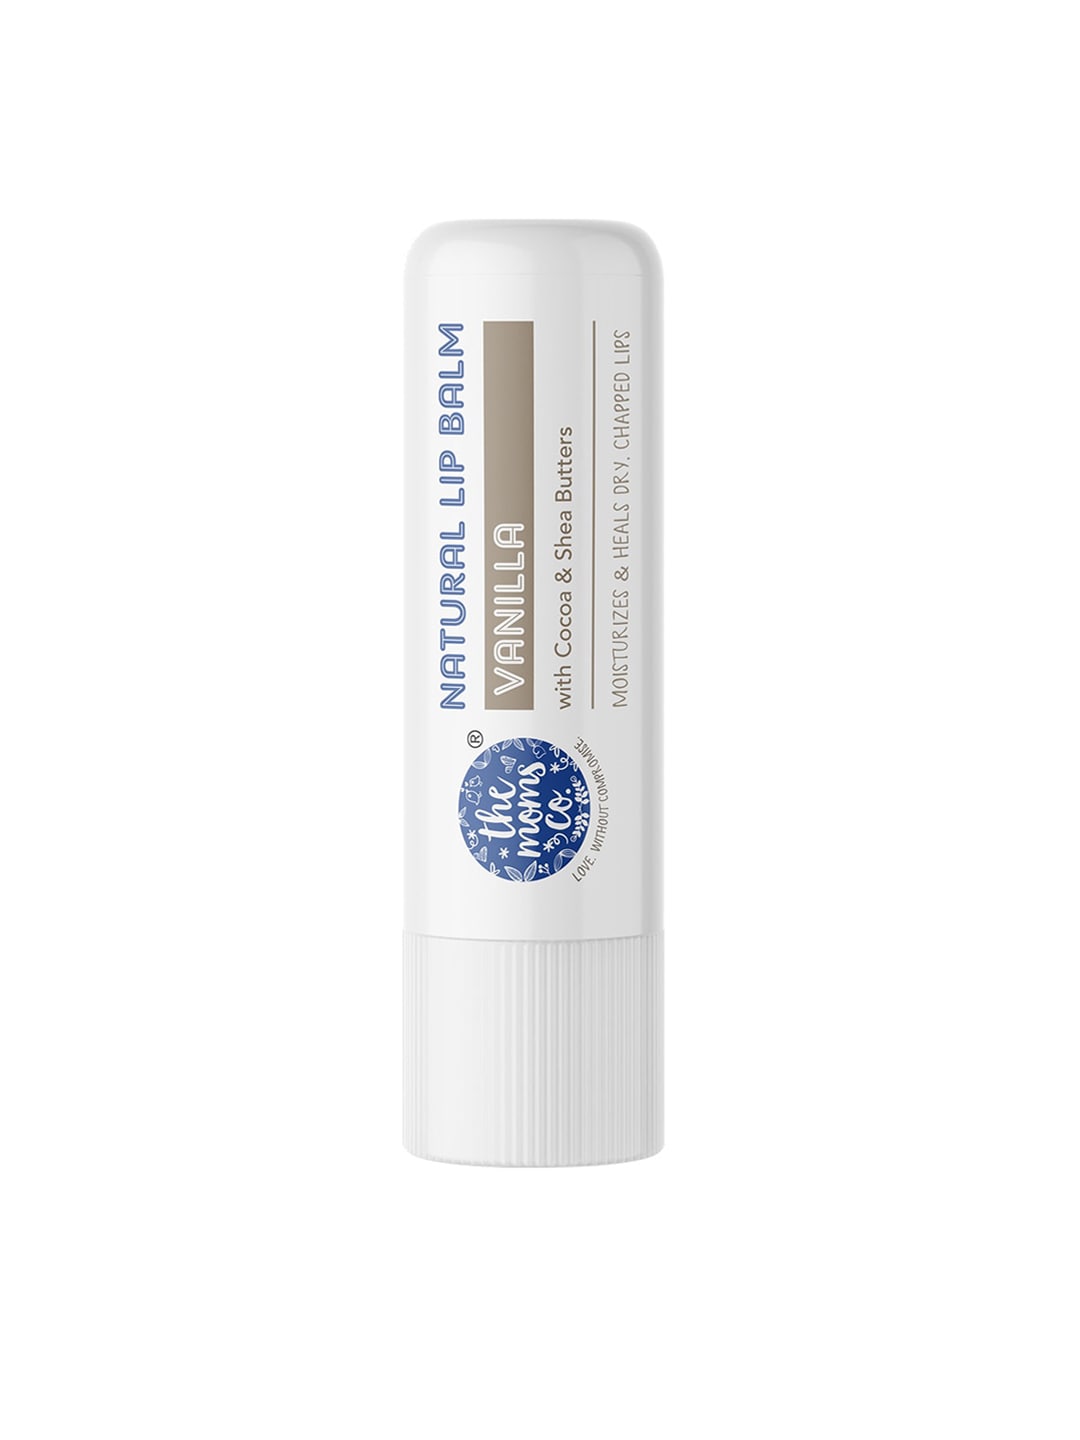 The Moms Co. Natural Vanilla Lip Balm with Vit E & Natural Extracts - 5 g Price in India